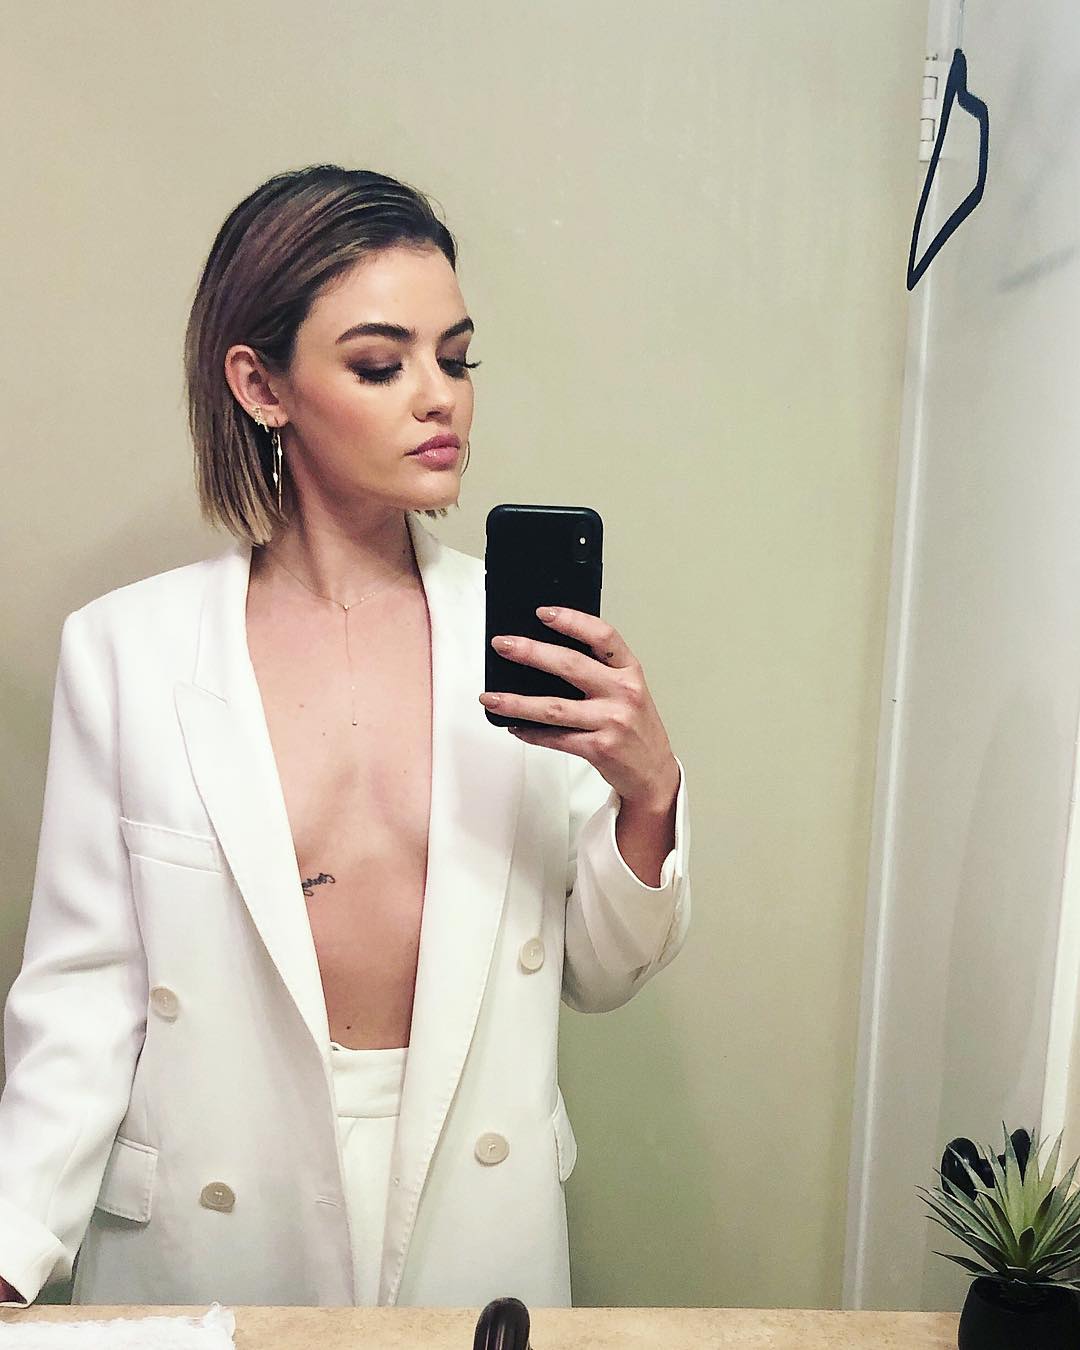 Hale toppless lucy Lucy Hale